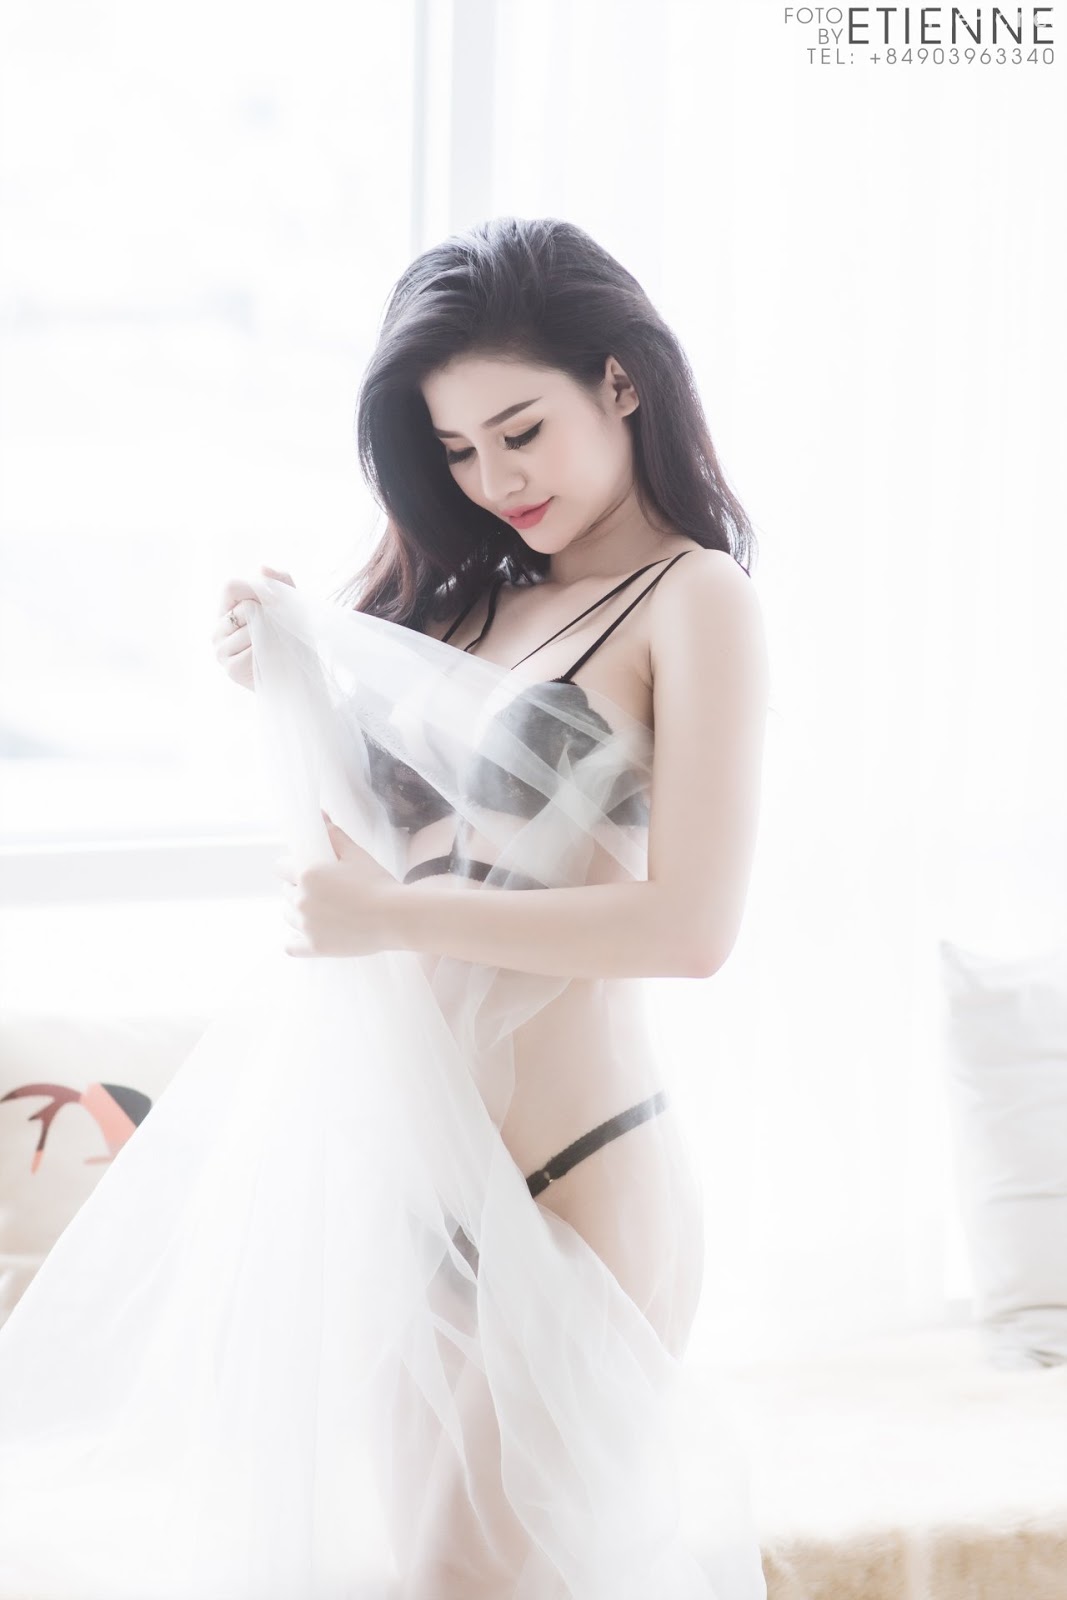 Super hot photos of Vietnamese beauties with lingerie and bikini – Photo by Le Blanc Studio – Part 7 - TruePic.net - Picture 48